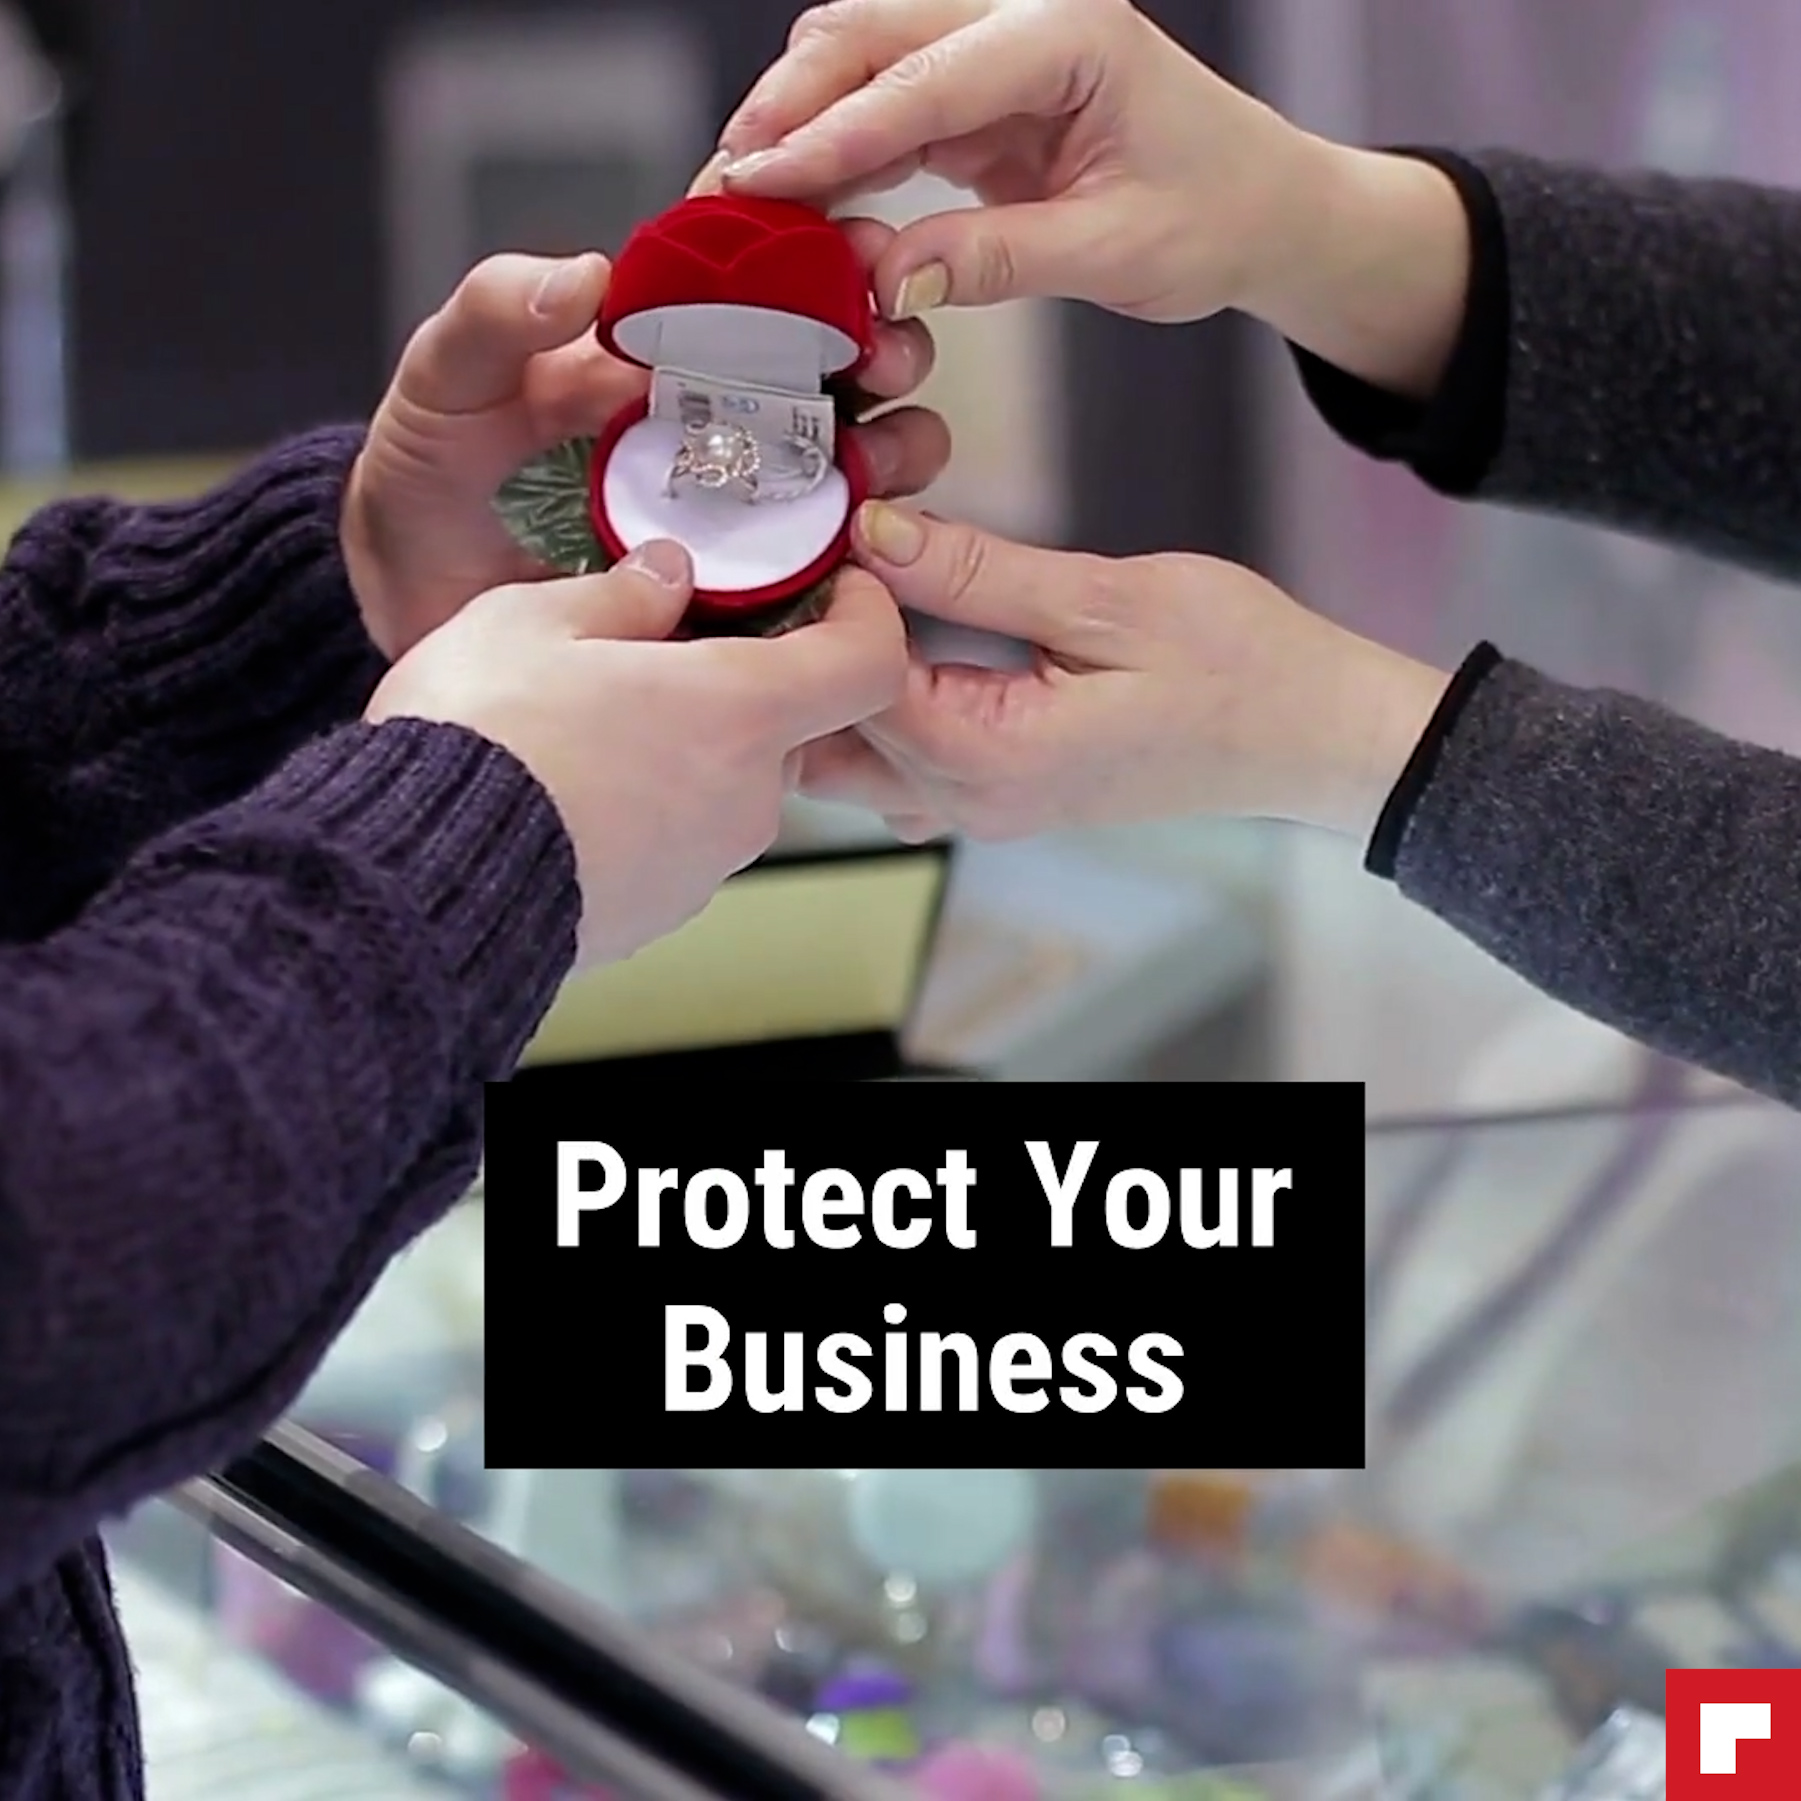 Protect Your Business w/Panic Buttons